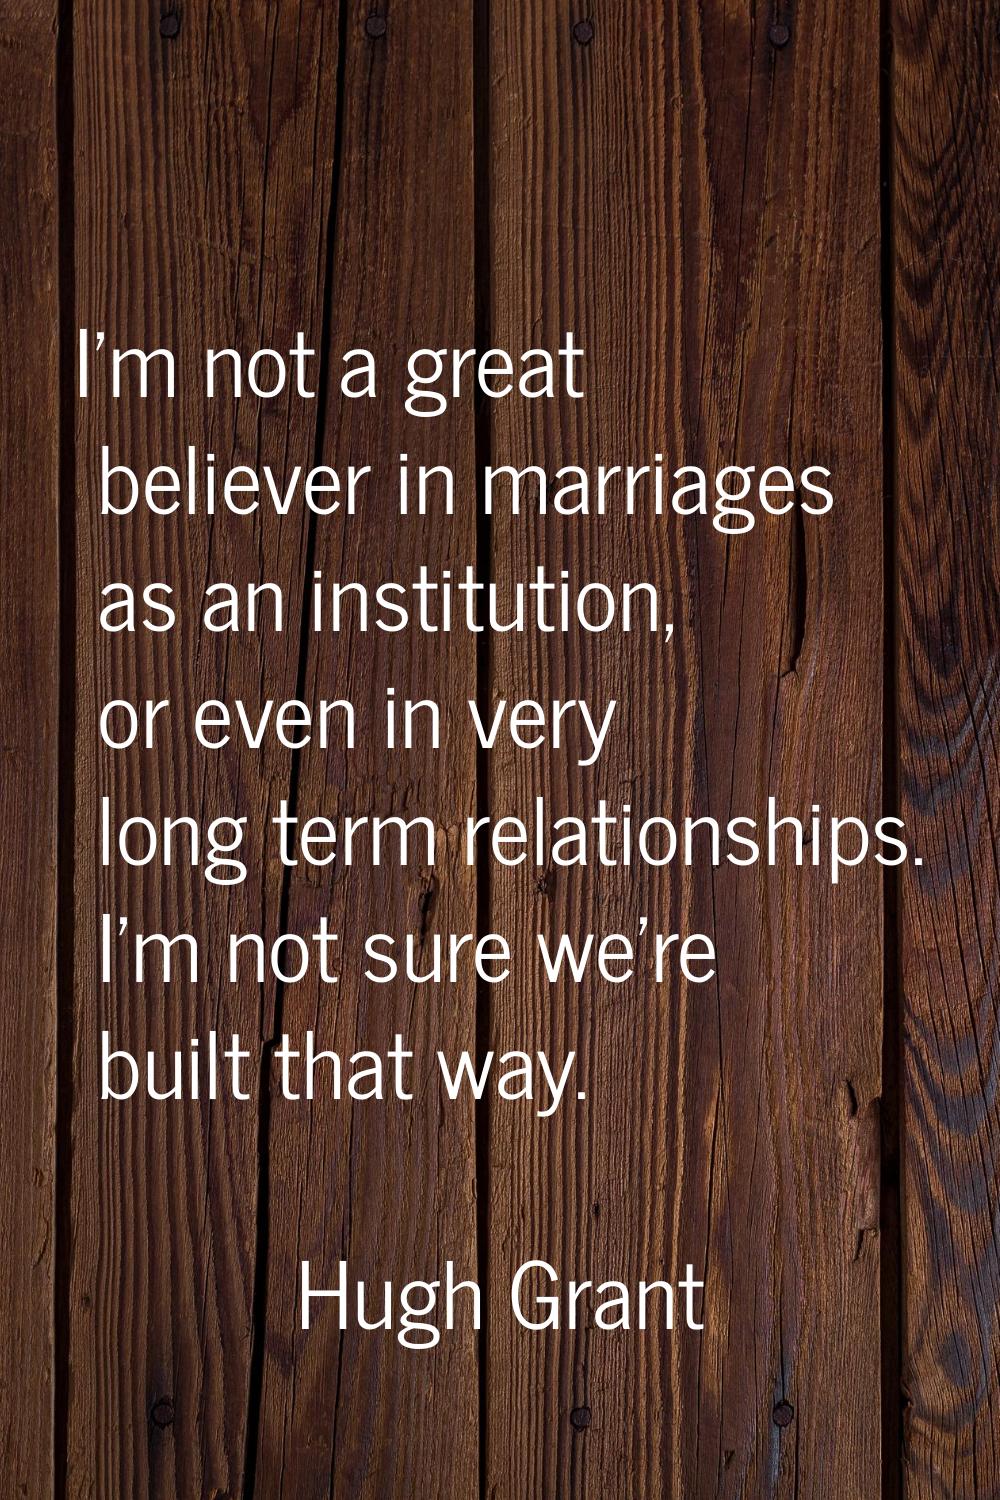 I'm not a great believer in marriages as an institution, or even in very long term relationships. I